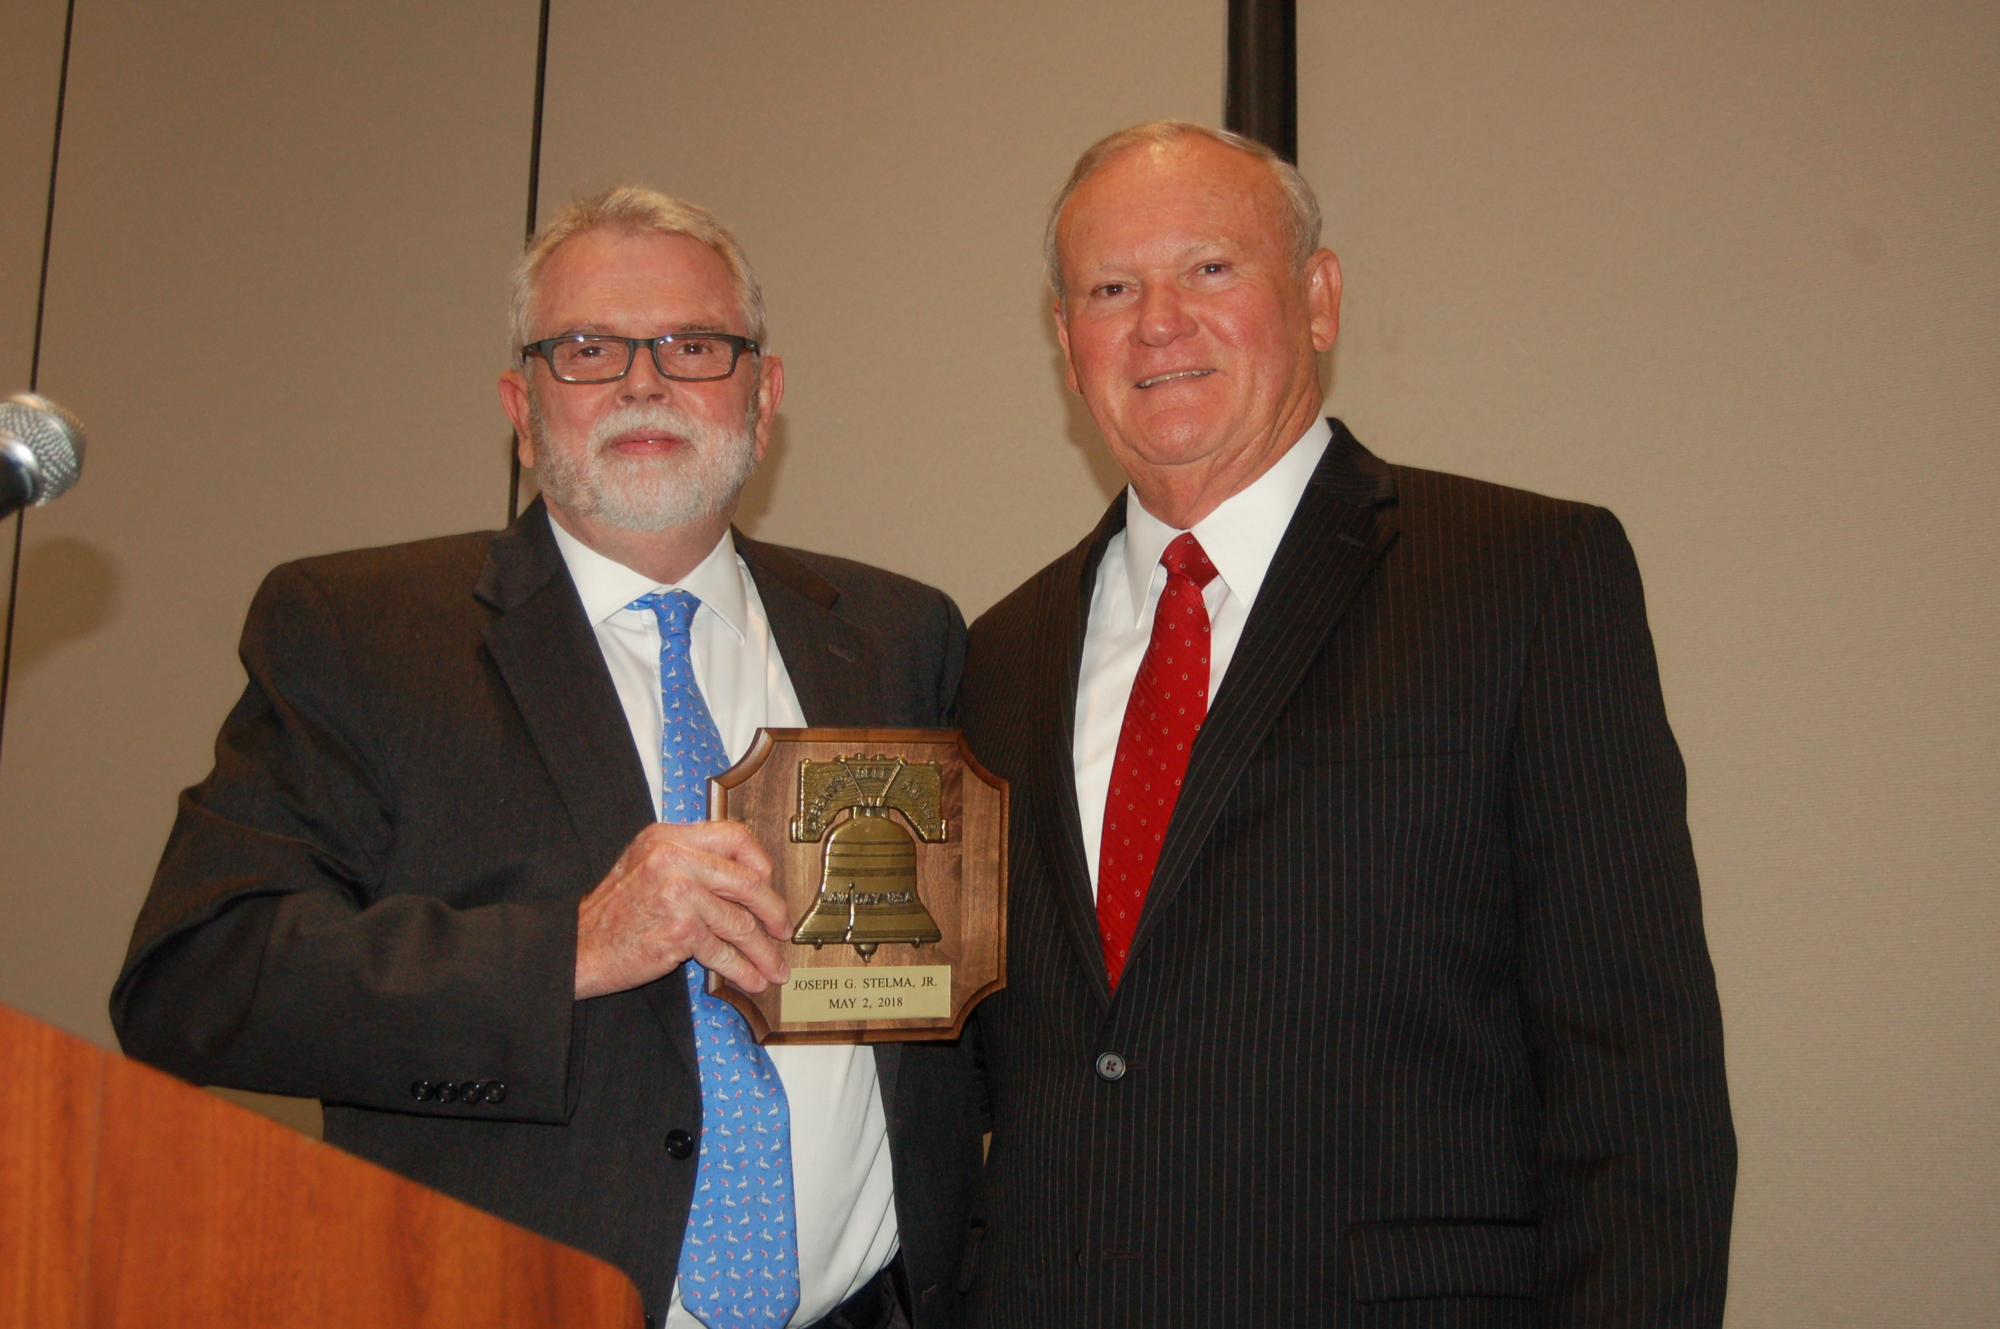 Fourth Judicial Circuit Chief Judge Mark Mahon, left, presented the 2018 Liberty Bell Award to Trial Court Administrator Joe Stelma.